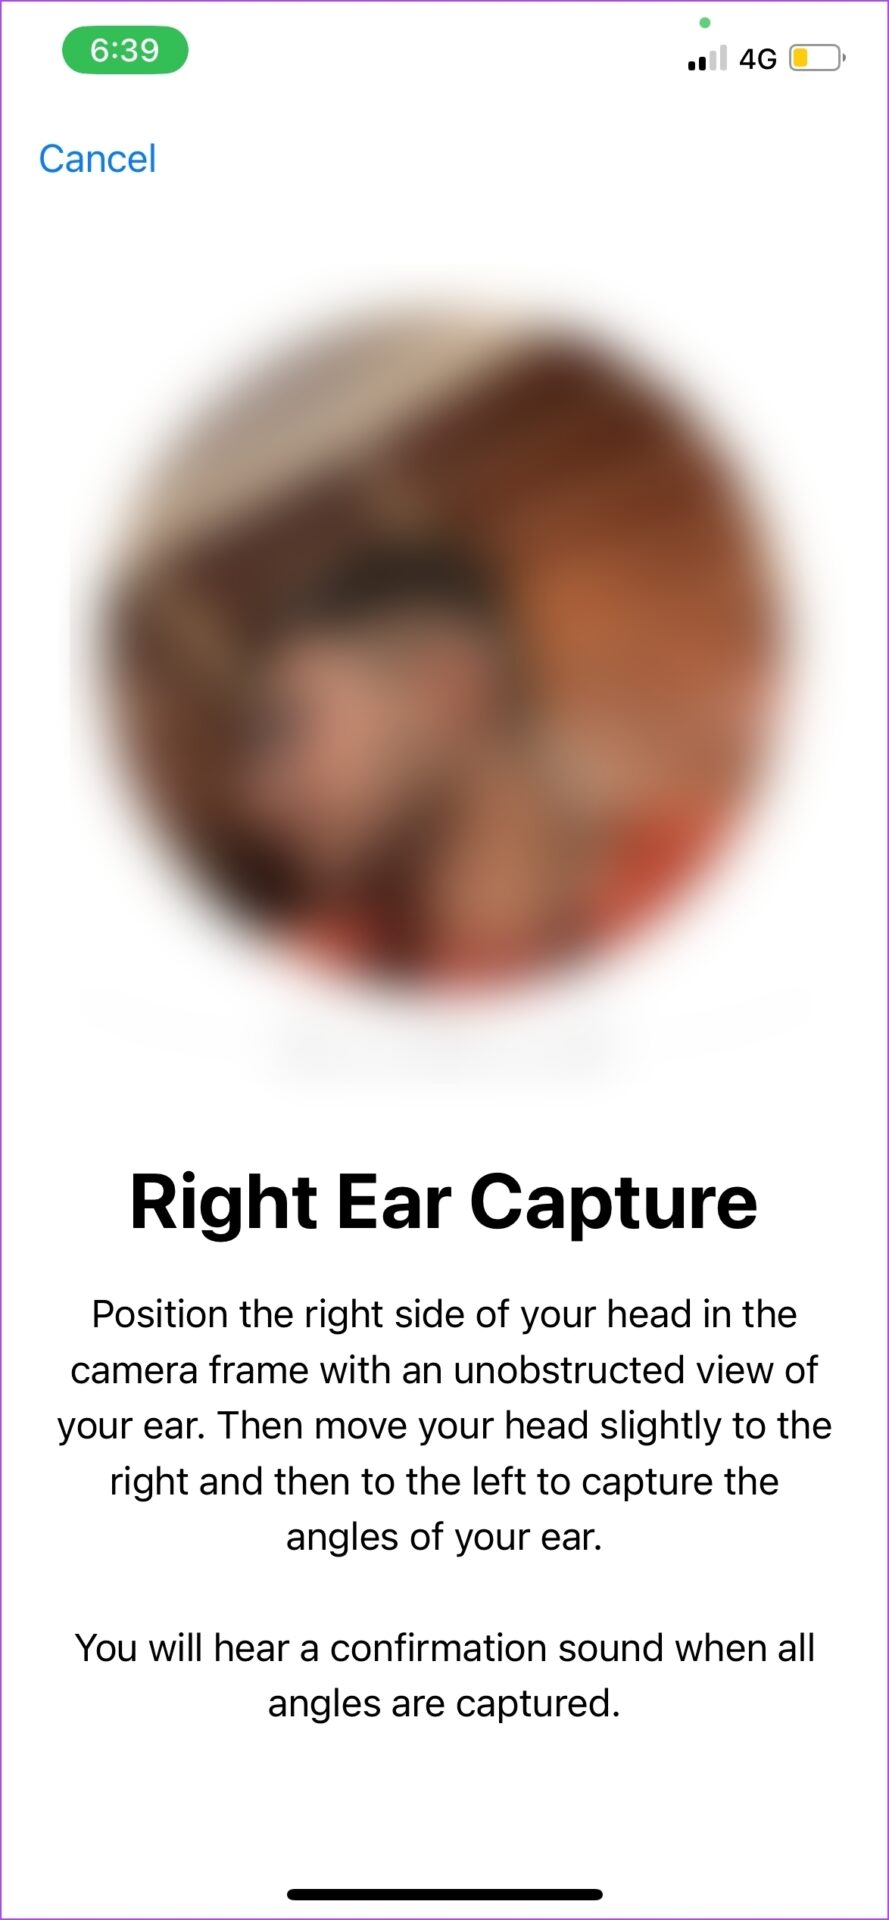 Capture of the right ear